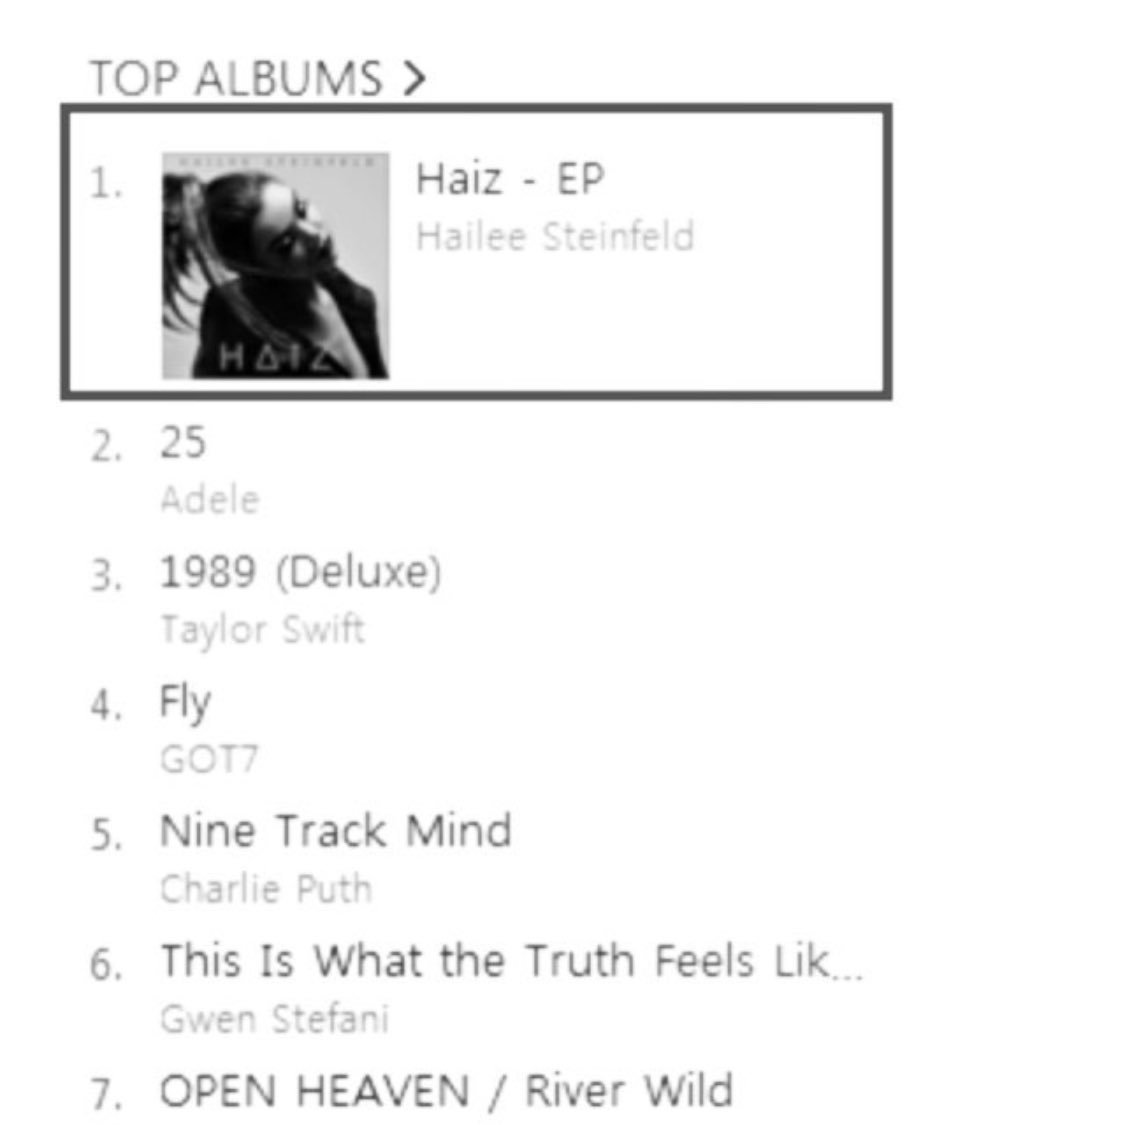 NUMBER 1 IN THE PHILIPPINES!

I can't wait to come personally thank you! Soon! ❤️❤️

#Haiz